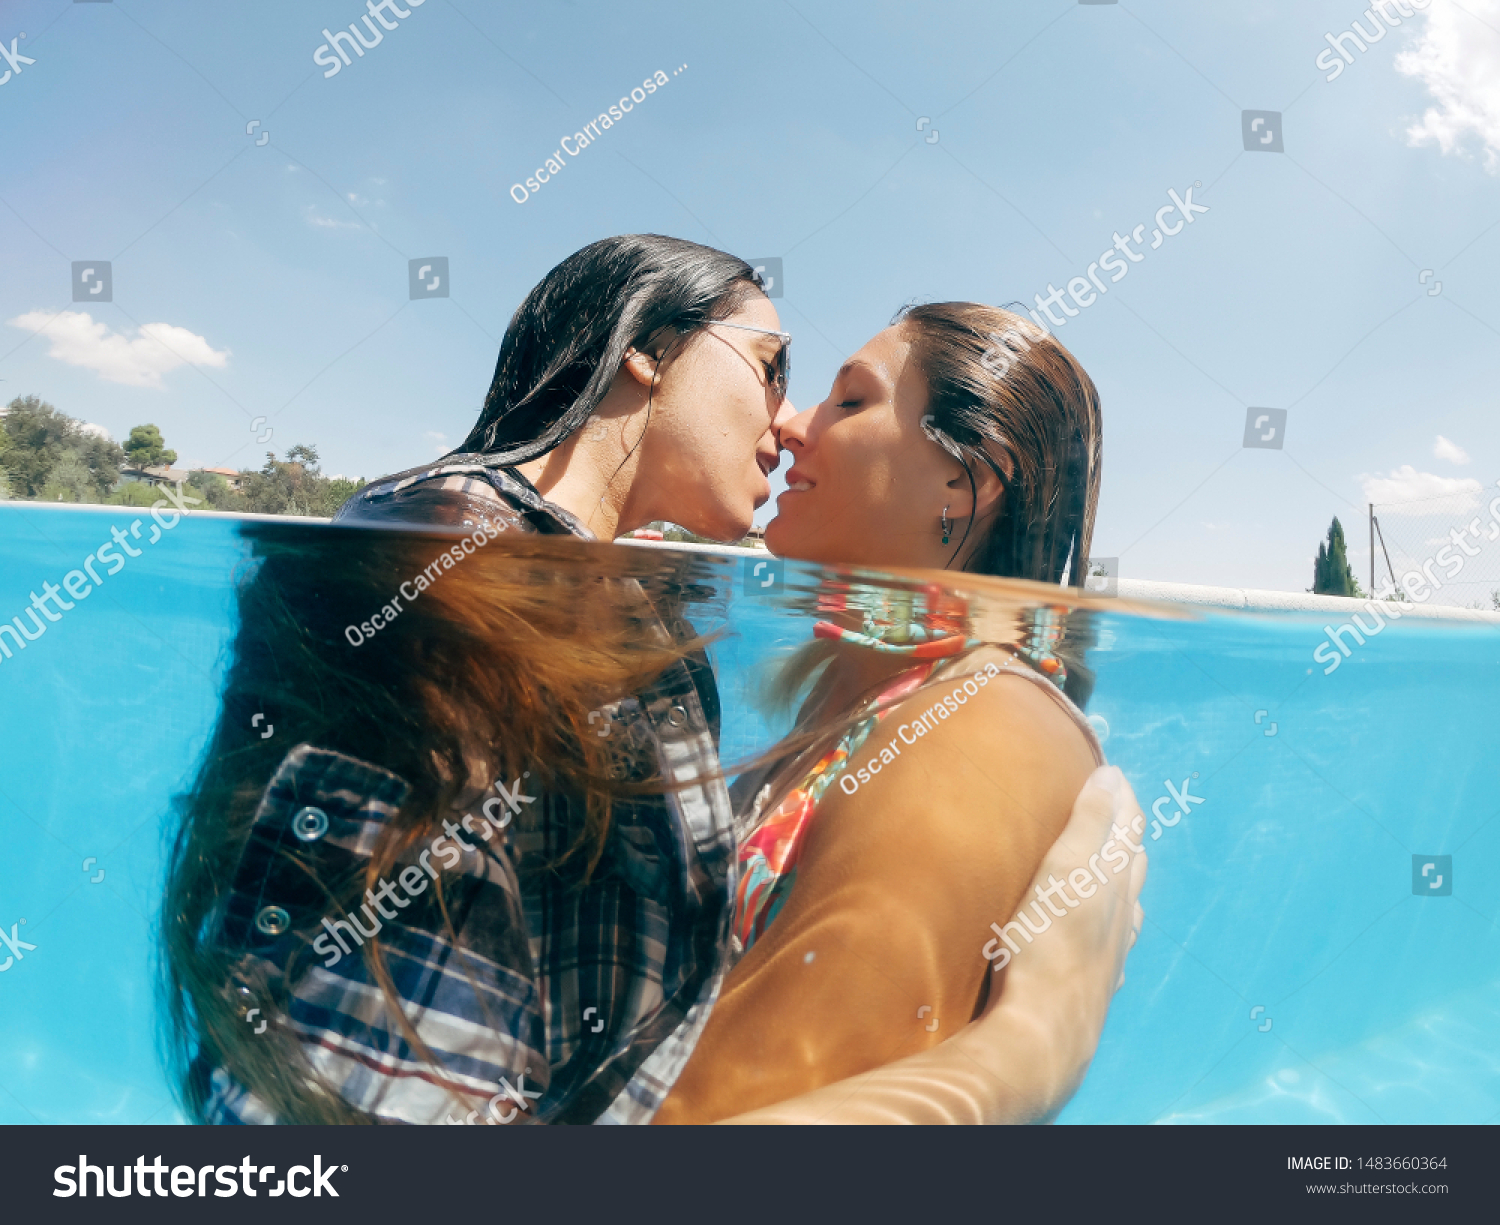 Lesbians topless in swimming pool making out